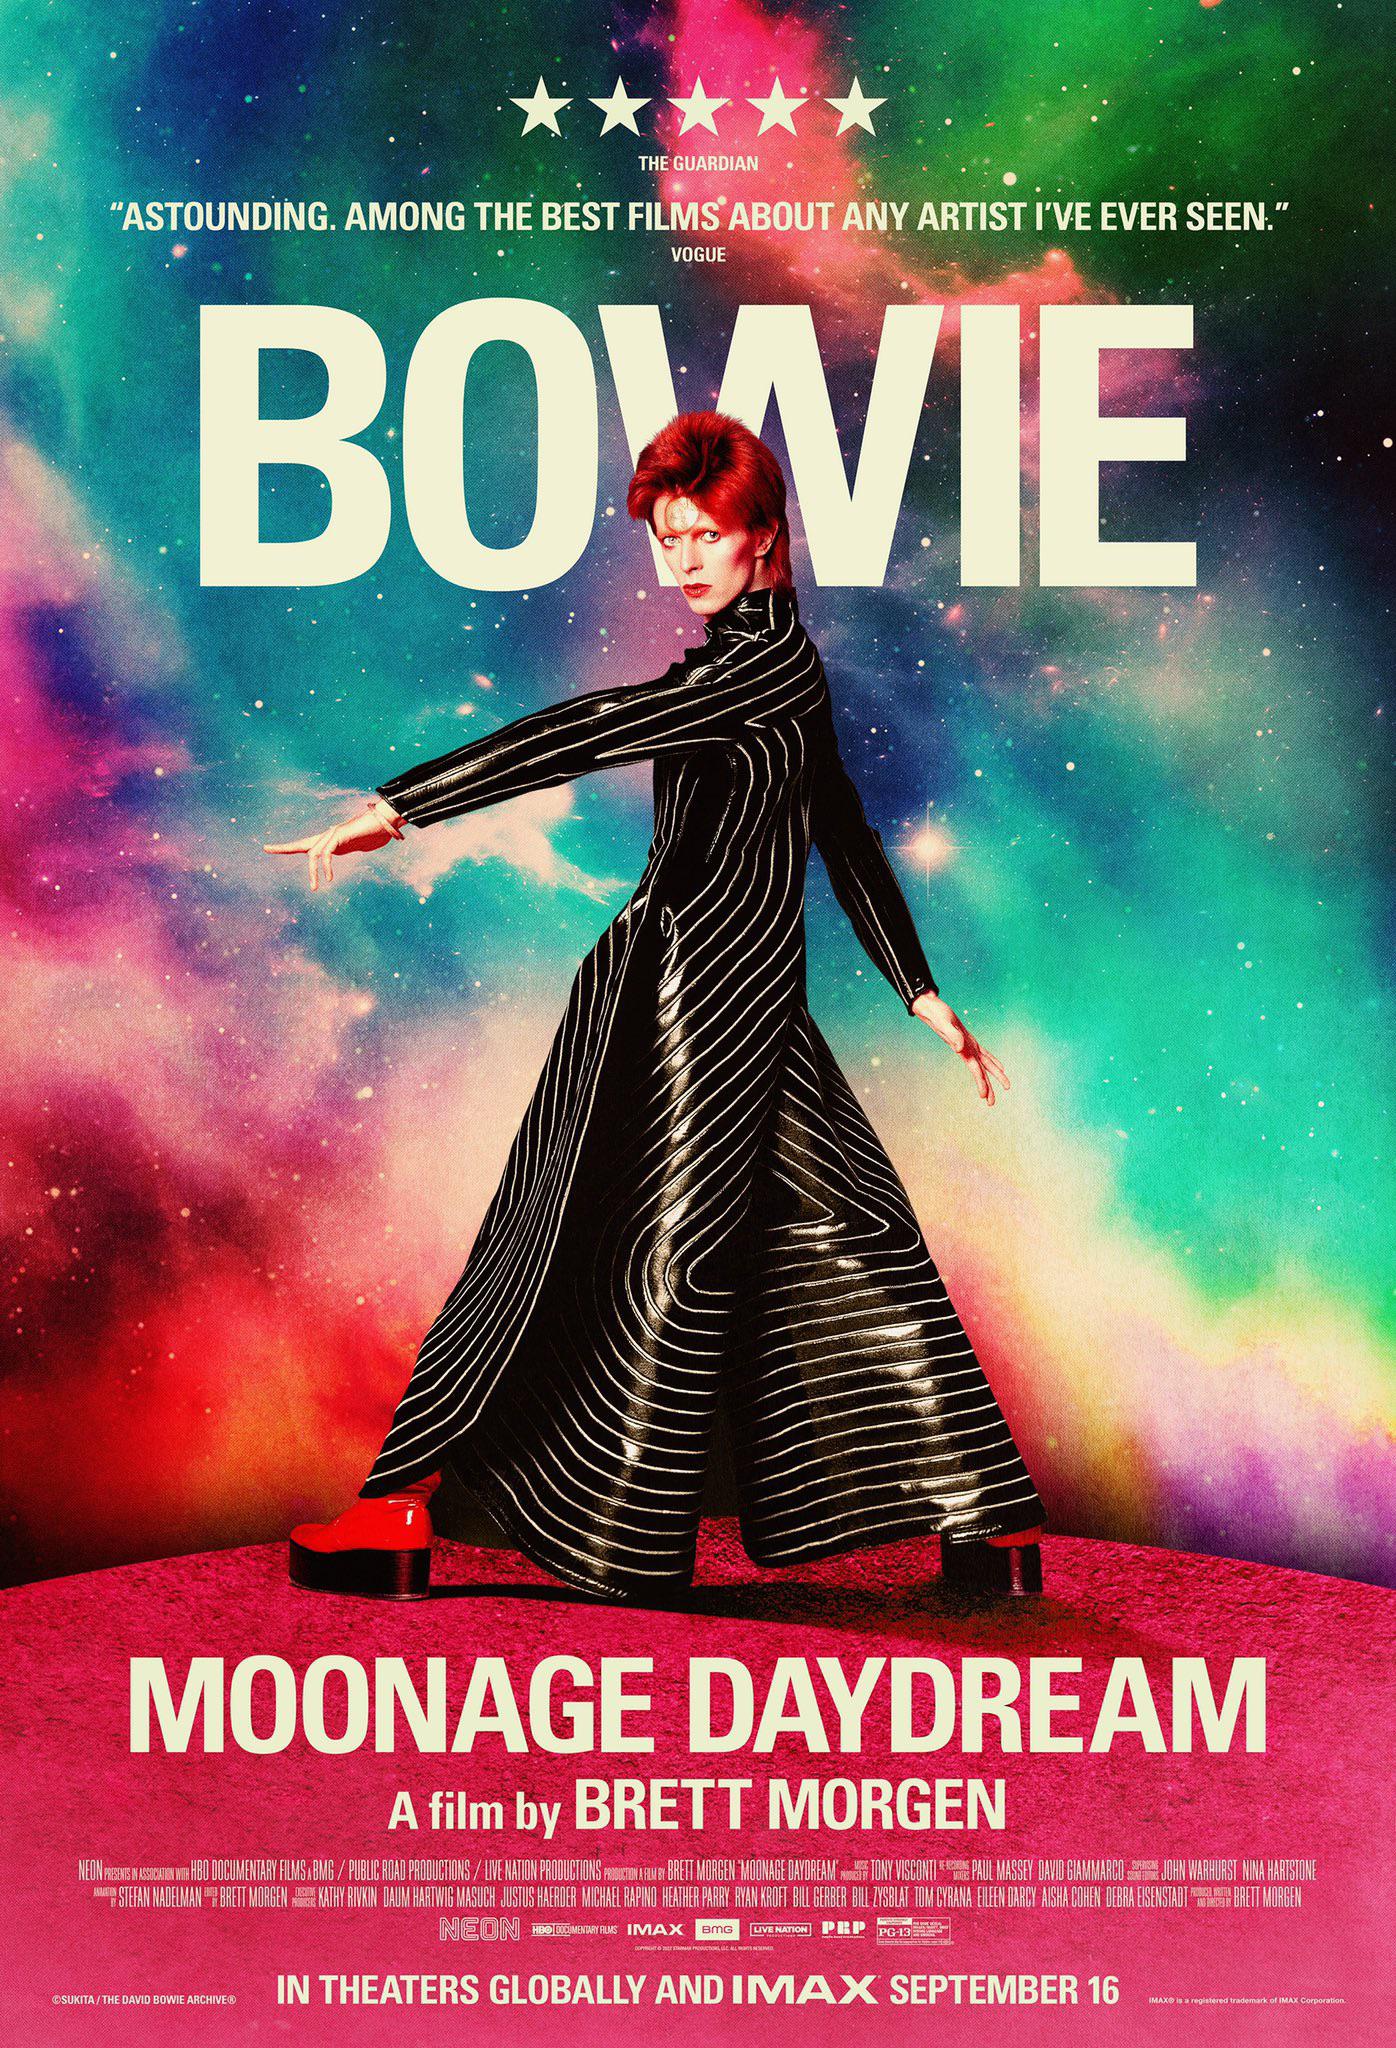 Official poster for 'MOONAGE DAYDREAM' starring David Bowie, Ziggy Stardust, Aladdin Sane, Halloween Jack, the Thin White Duke, the Cracked Actor, and the Blind Prophet